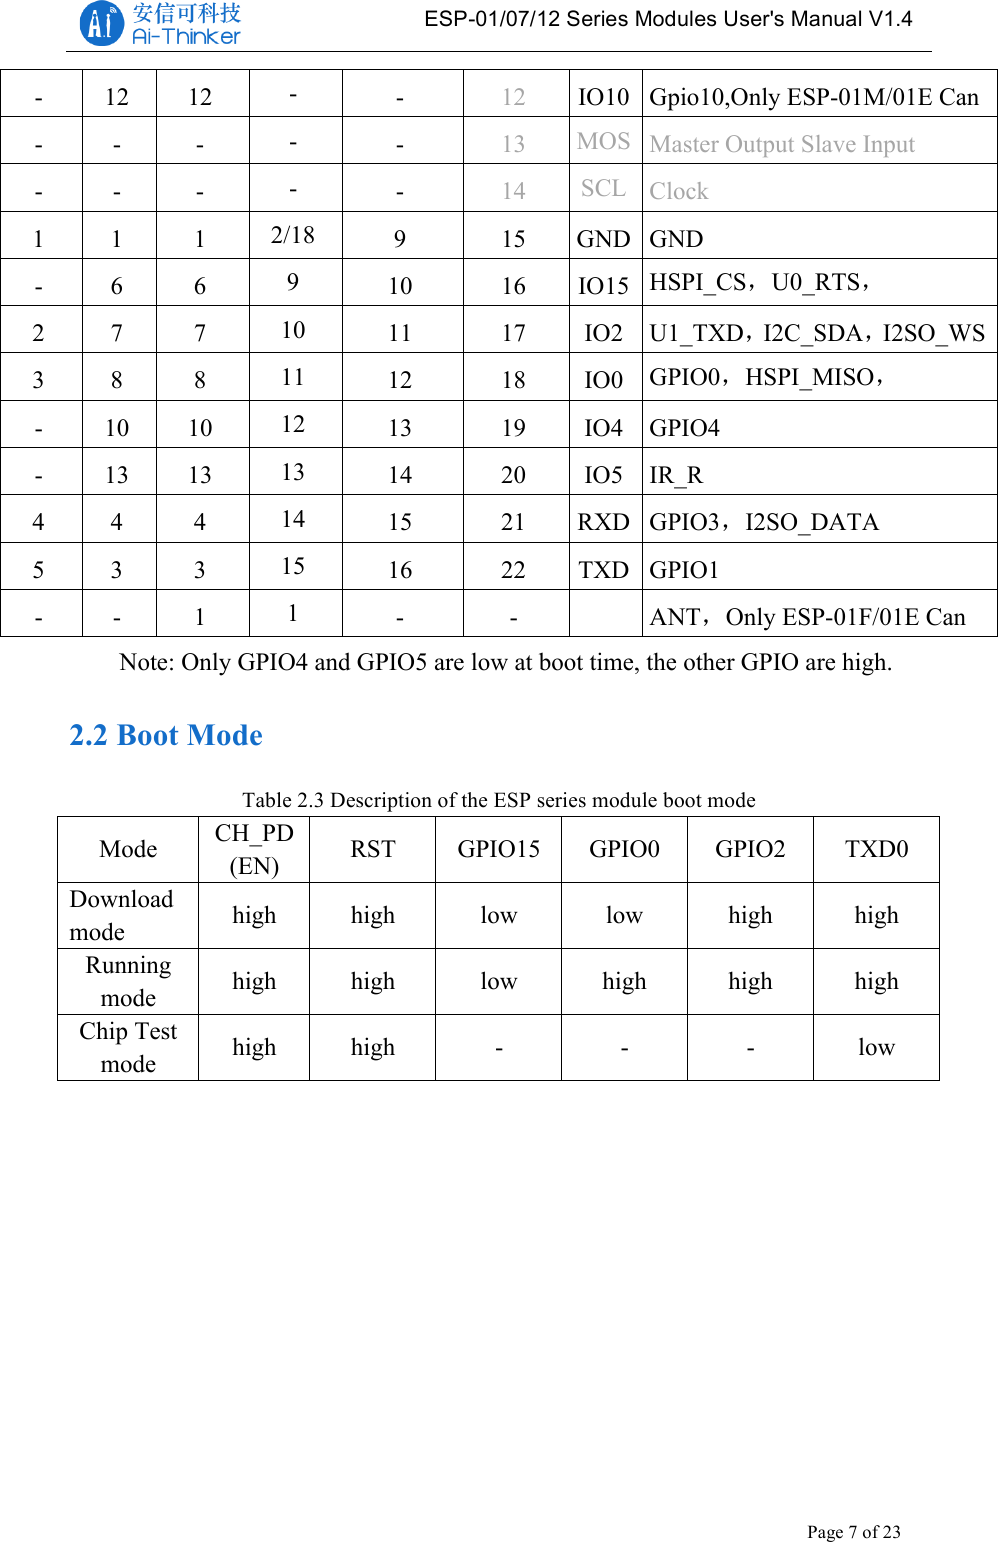   ESP-01/07/12 Series Modules User&apos;s Manual V1.4 Copyright © 2017 Shenzhen Ai-Thinker Technology Co., Ltd All Rights Reserved Page 7 of 23   - 12 12 - - 12 IO10 Gpio10,Only ESP-01M/01E Can - - - - - 13 MOSI Master Output Slave Input - - - - - 14 SCLK Clock 1 1 1 2/18 9 15 GND GND - 6 6 9 10 16 IO15 HSPI_CS，U0_RTS，I2SO_BCK 2 7 7 10 11 17 IO2 U1_TXD，I2C_SDA，I2SO_WS 3 8 8 11 12 18 IO0 GPIO0，HSPI_MISO，I2SI_DATA - 10 10 12 13 19 IO4 GPIO4 - 13 13 13 14 20 IO5 IR_R 4 4 4 14 15 21 RXD GPIO3，I2SO_DATA 5 3 3 15 16 22 TXD GPIO1 - - 1 1 - -  ANT，Only ESP-01F/01E Can Note: Only GPIO4 and GPIO5 are low at boot time, the other GPIO are high. 2.2 Boot Mode Table 2.3 Description of the ESP series module boot mode Mode CH_PD (EN) RST GPIO15 GPIO0 GPIO2 TXD0 Download mode high high low low high high Running mode high high low high high high Chip Test mode high high - - - low    